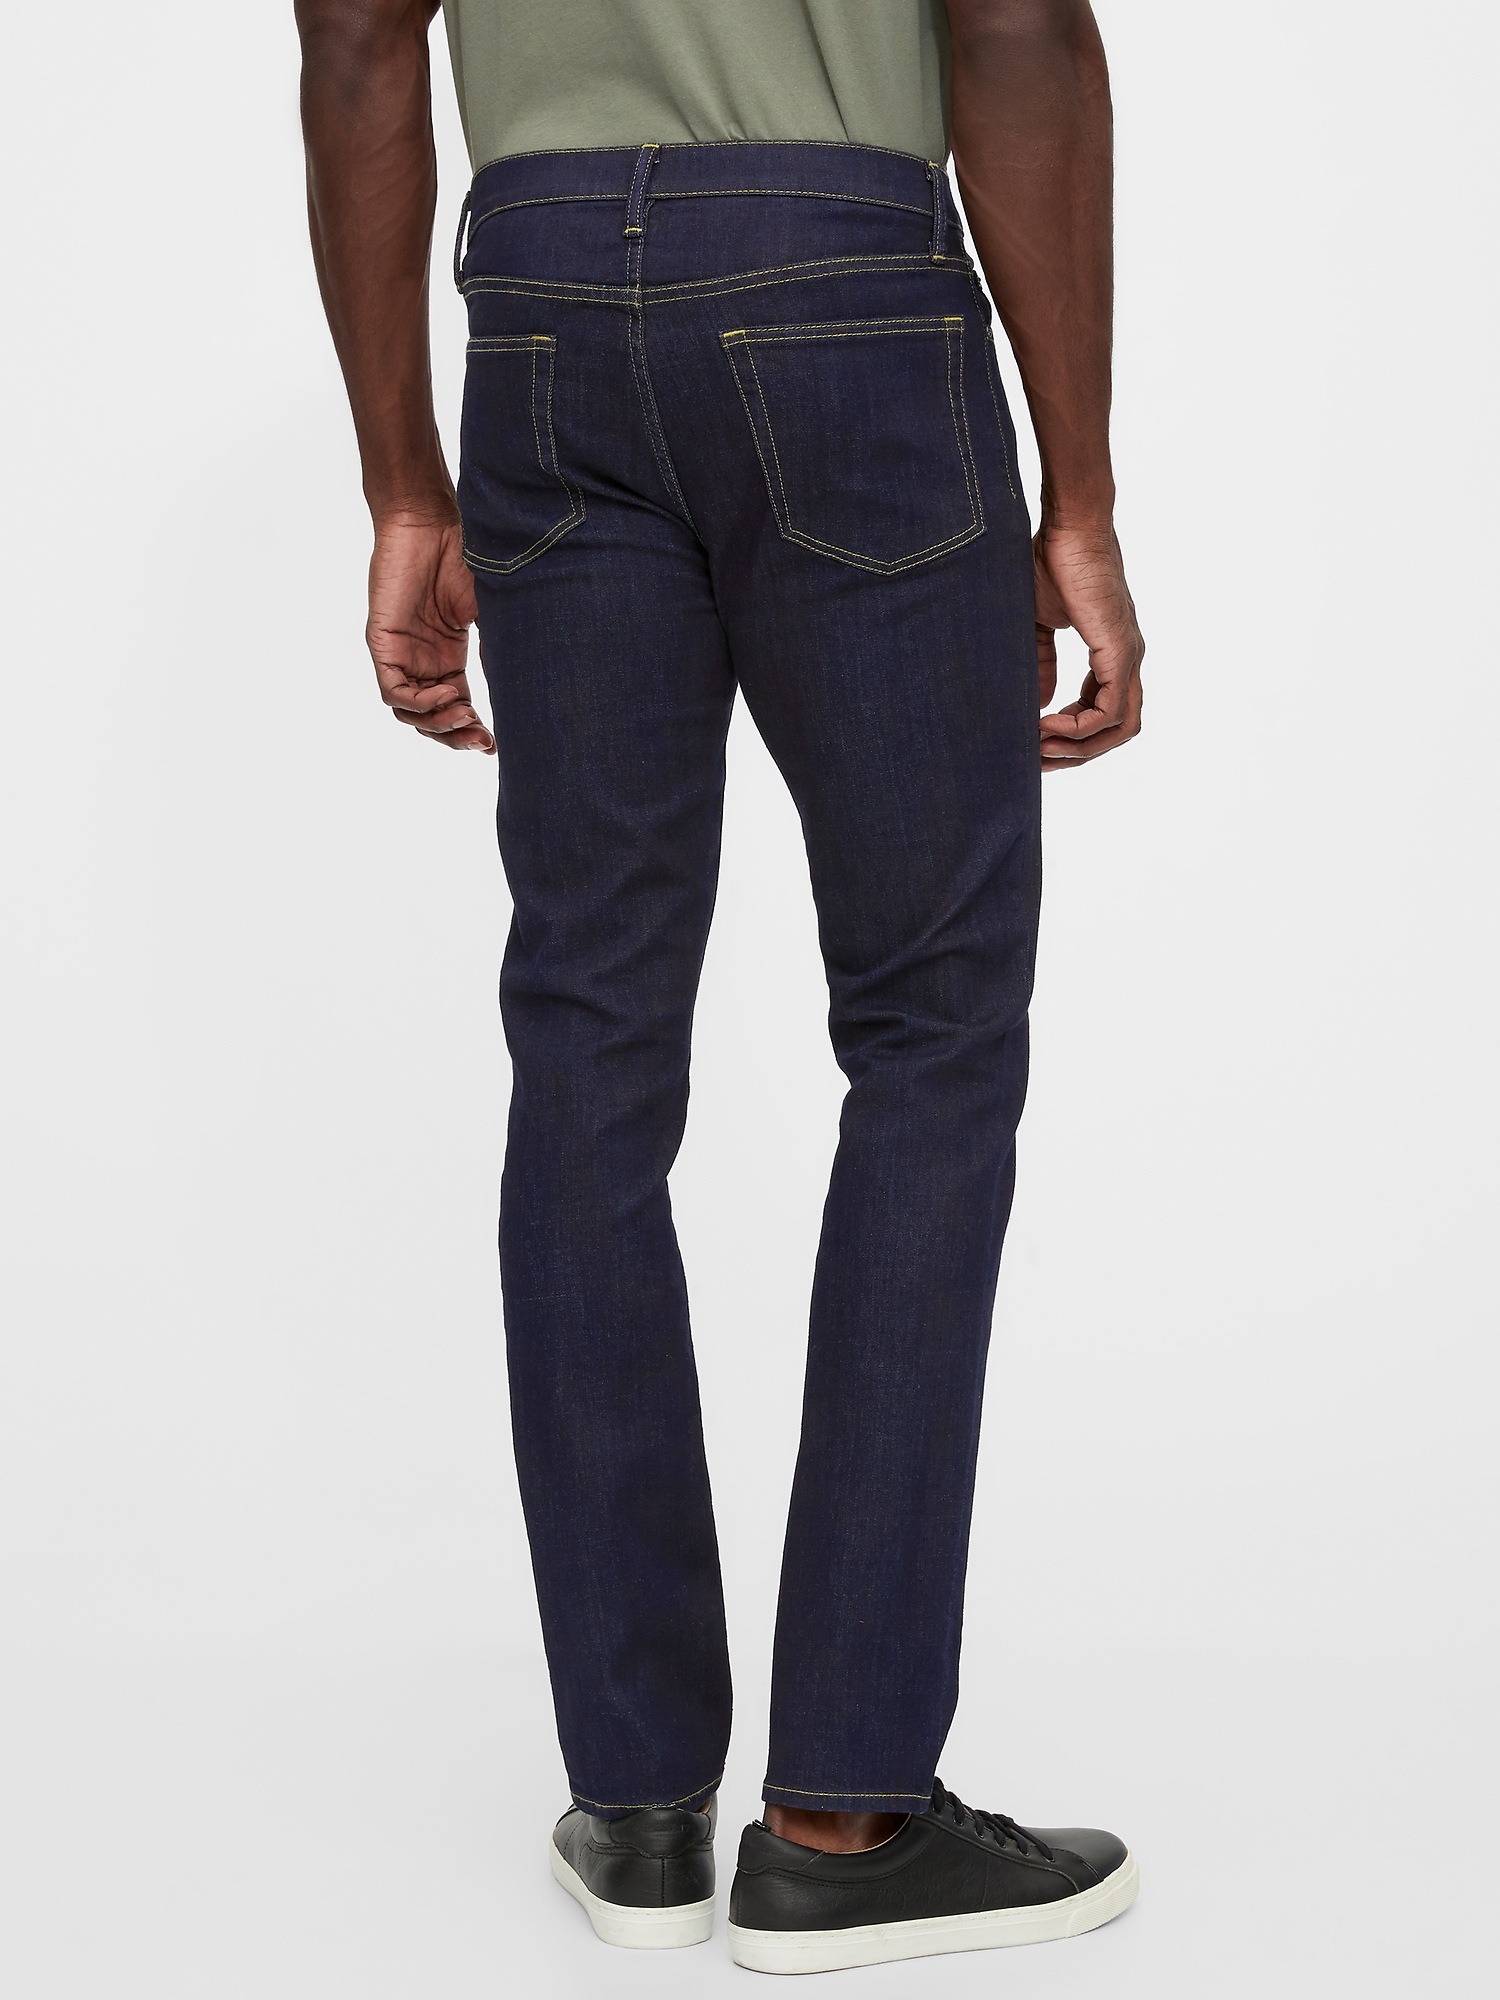 Soft Wear Skinny Jeans With Washwell™ | Gap Factory